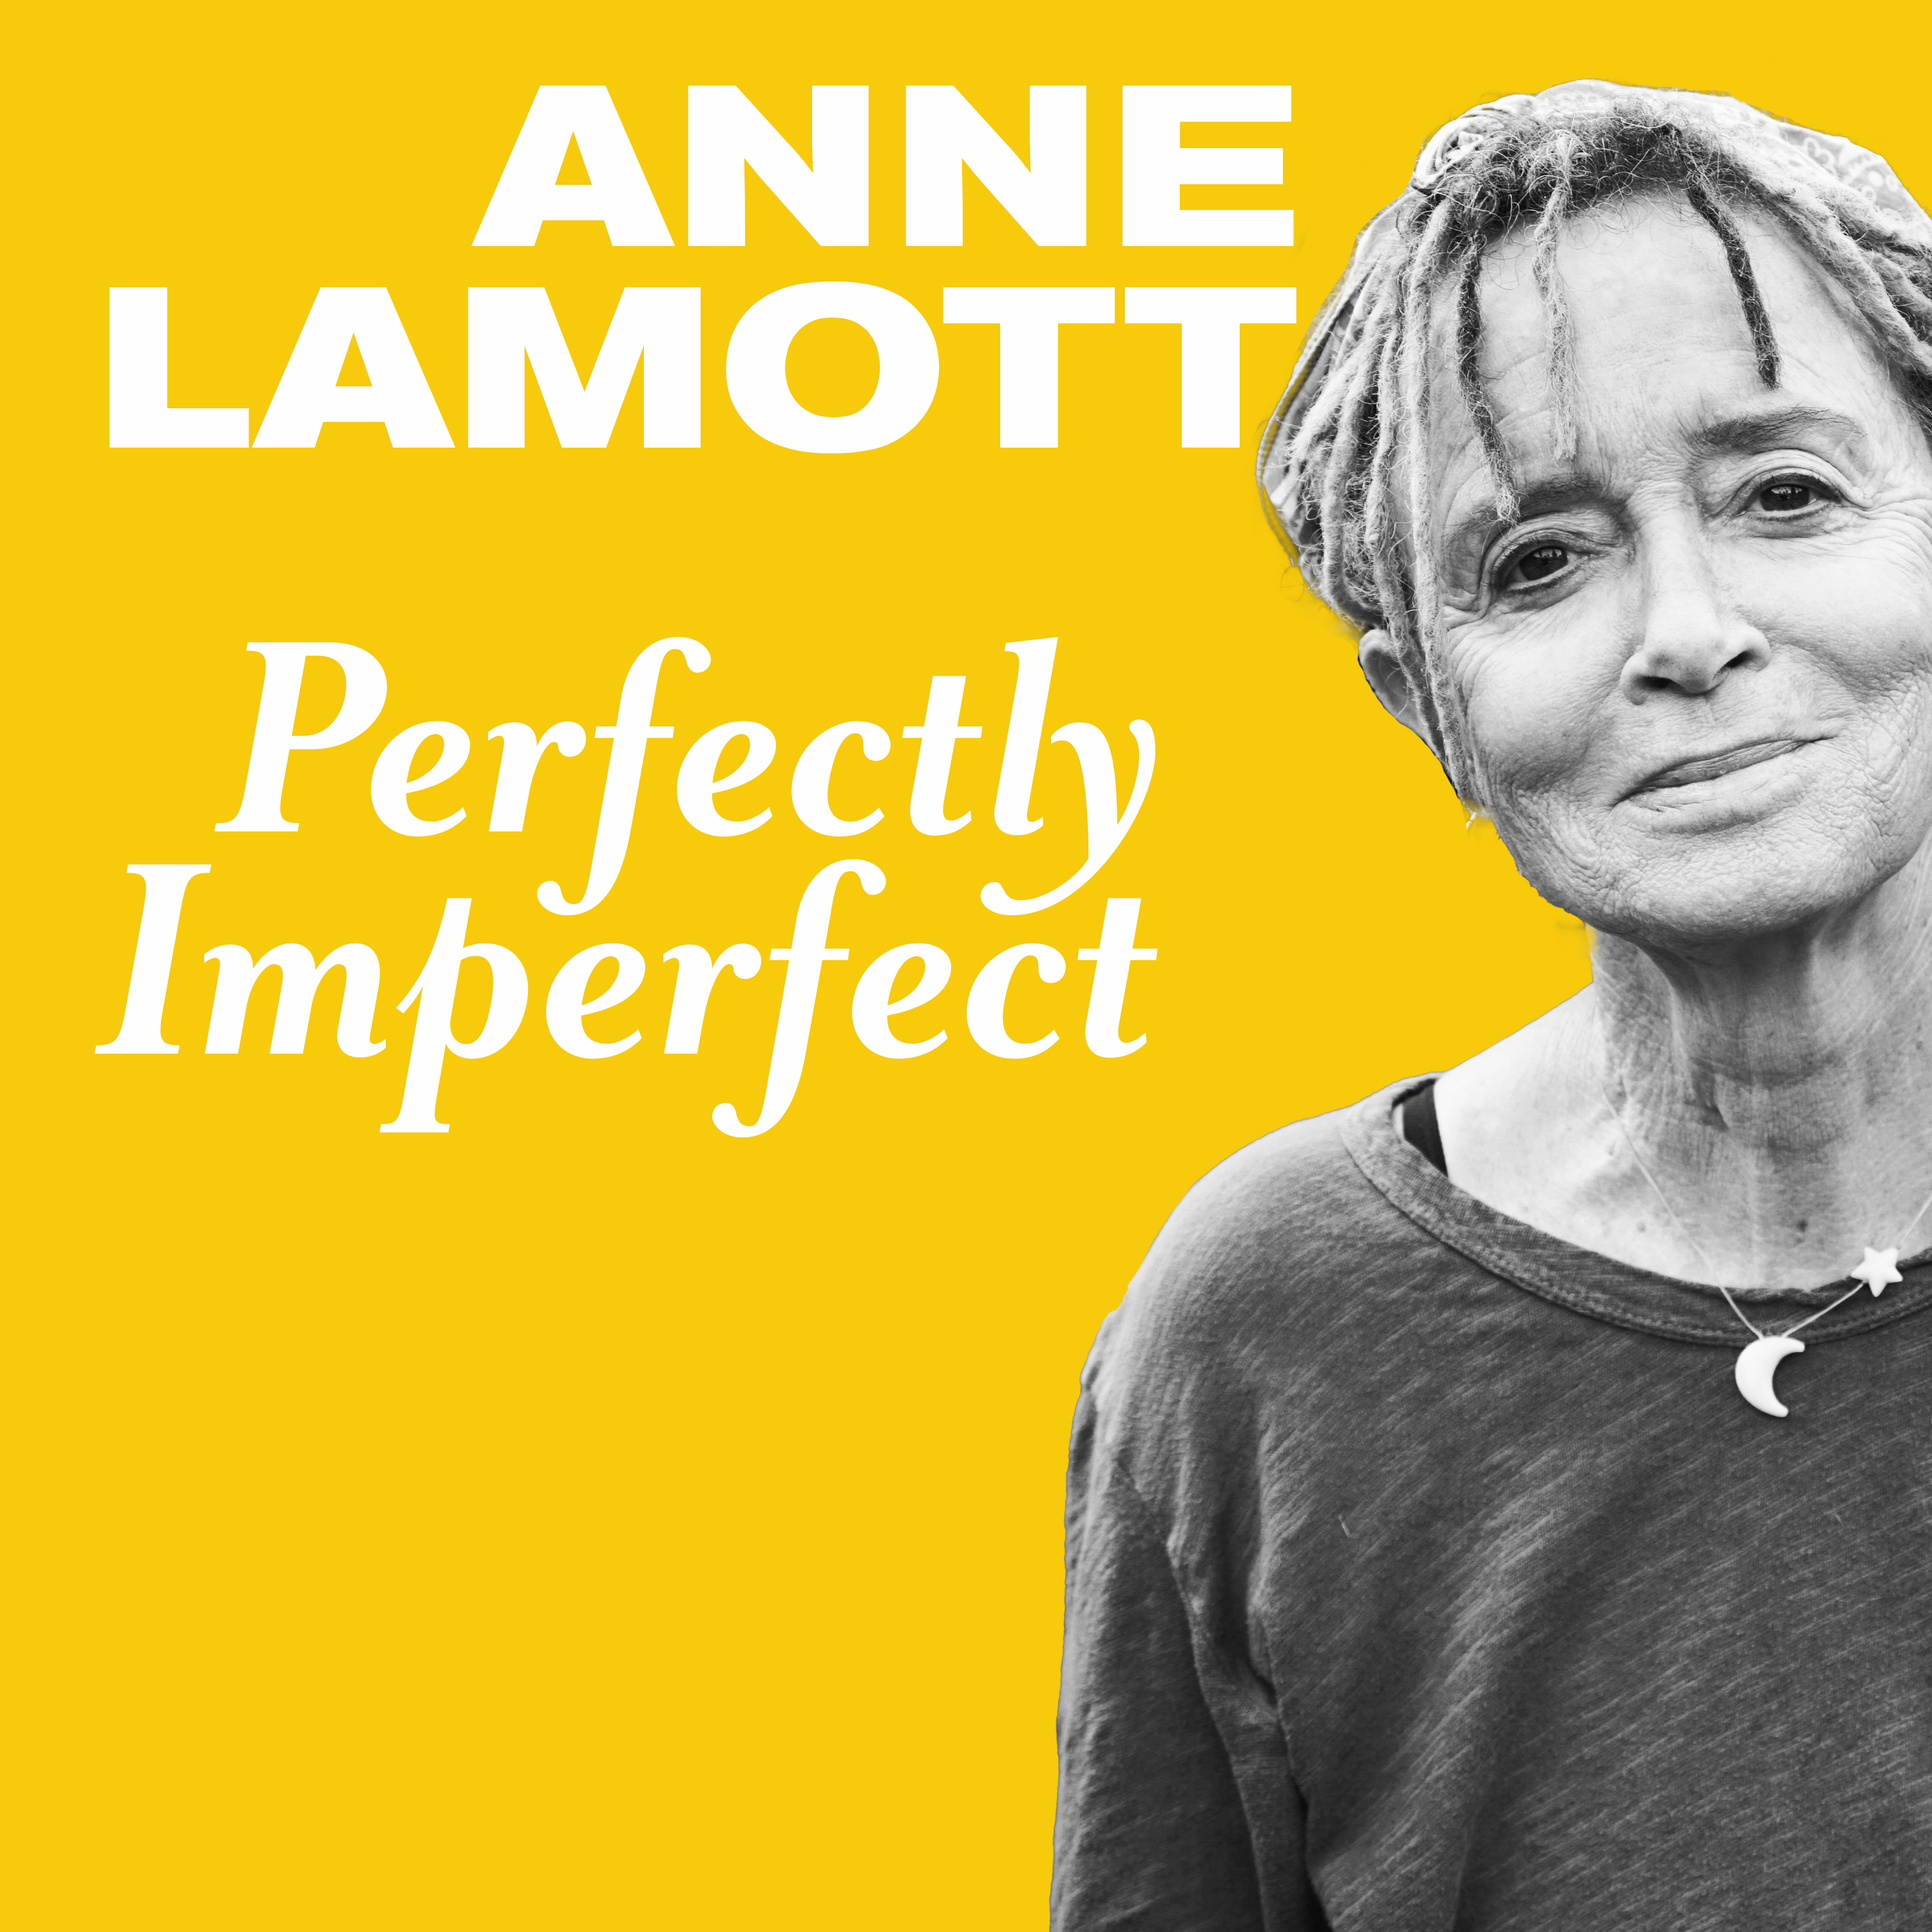 Anne Lamott on Perfectly Imperfect